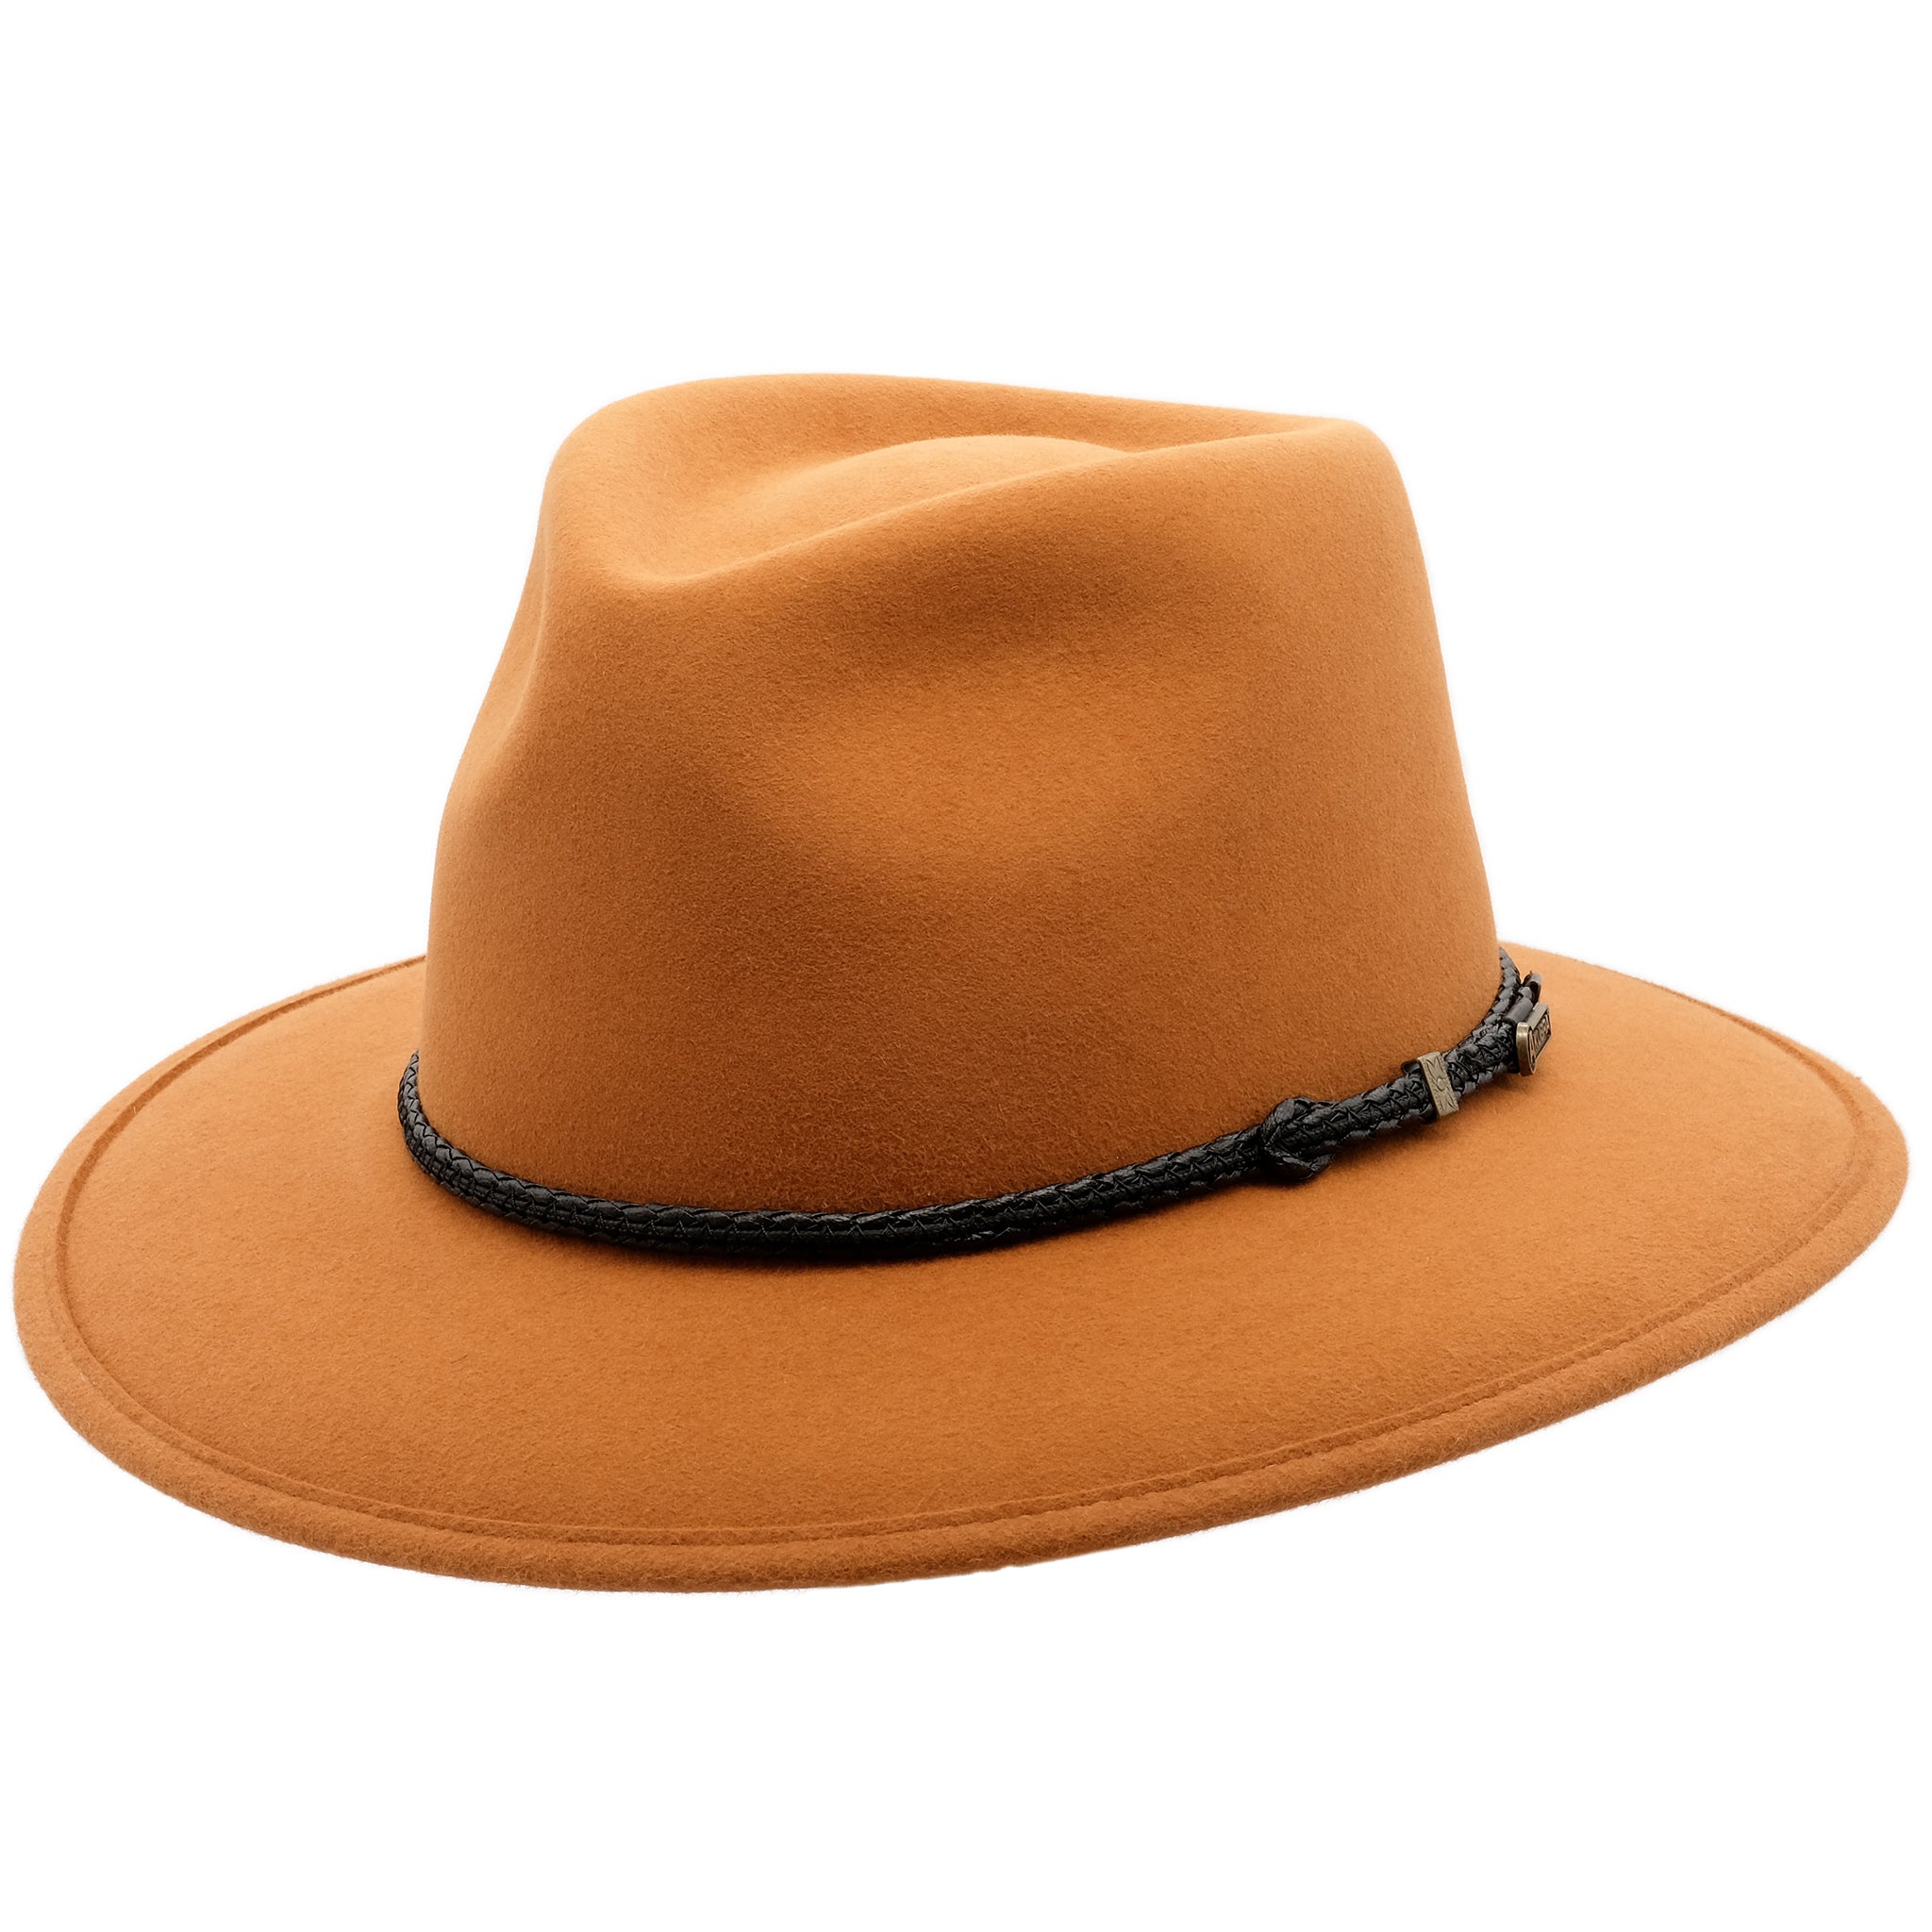 Angle View of the Akubra Traveller in Rust colour 